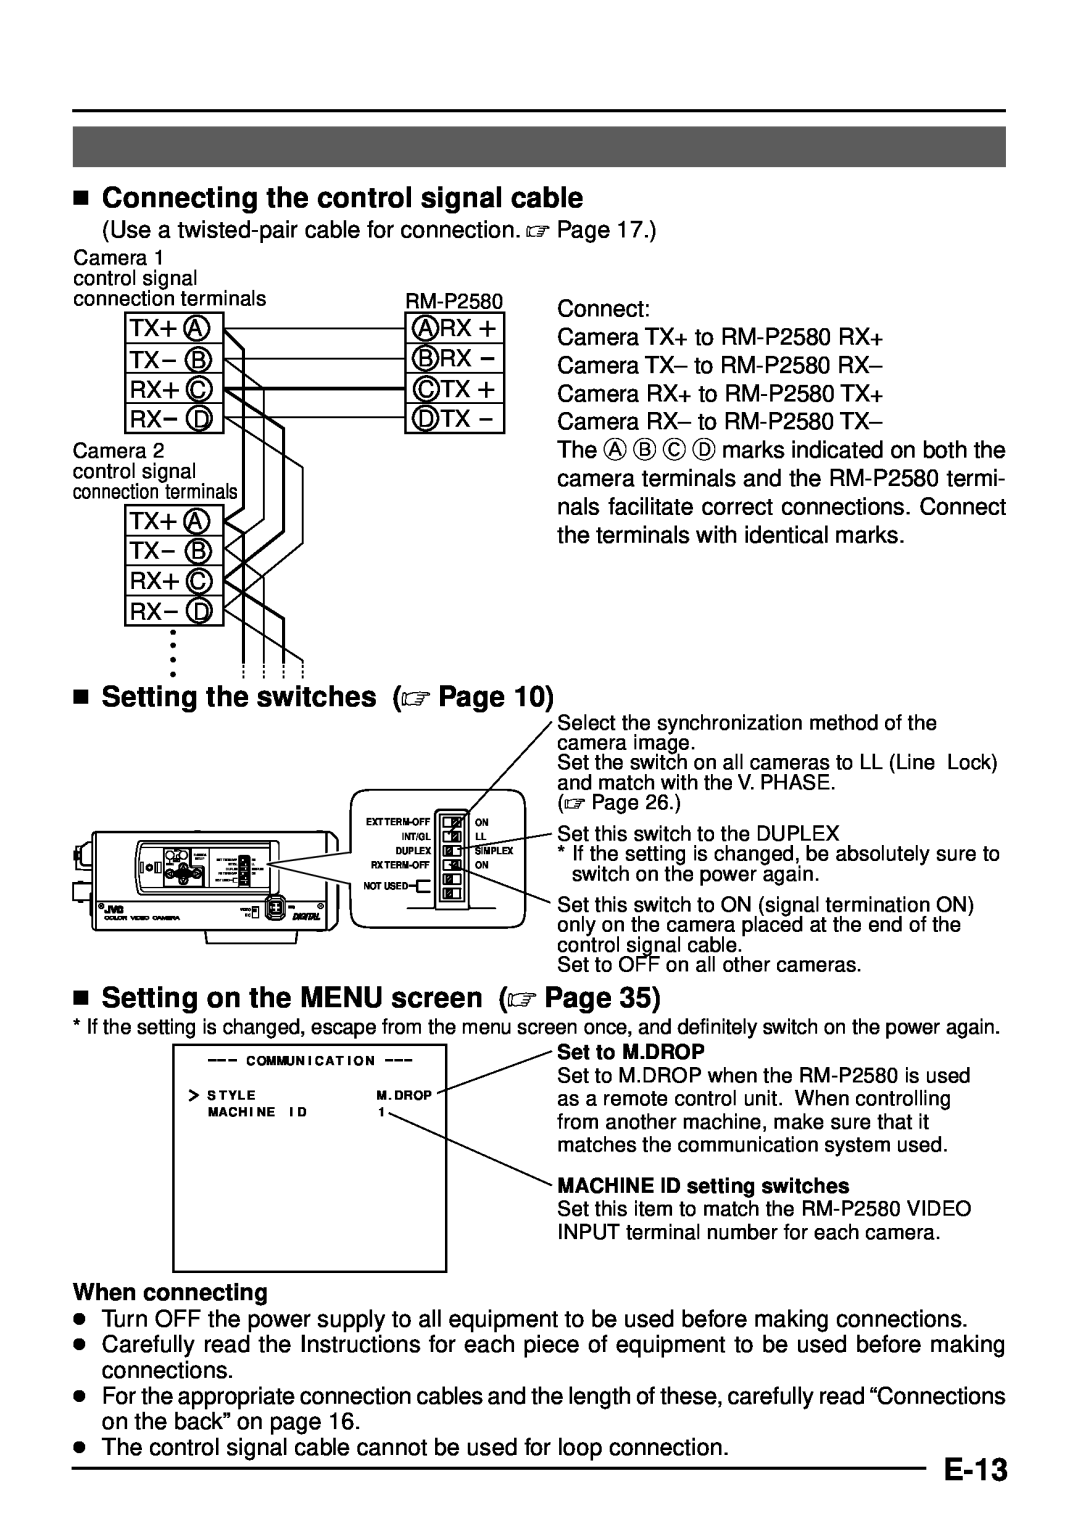 JVC TK-C1460 manual E-13,  Connecting the control signal cable,  Setting the switches , Page, When connecting 